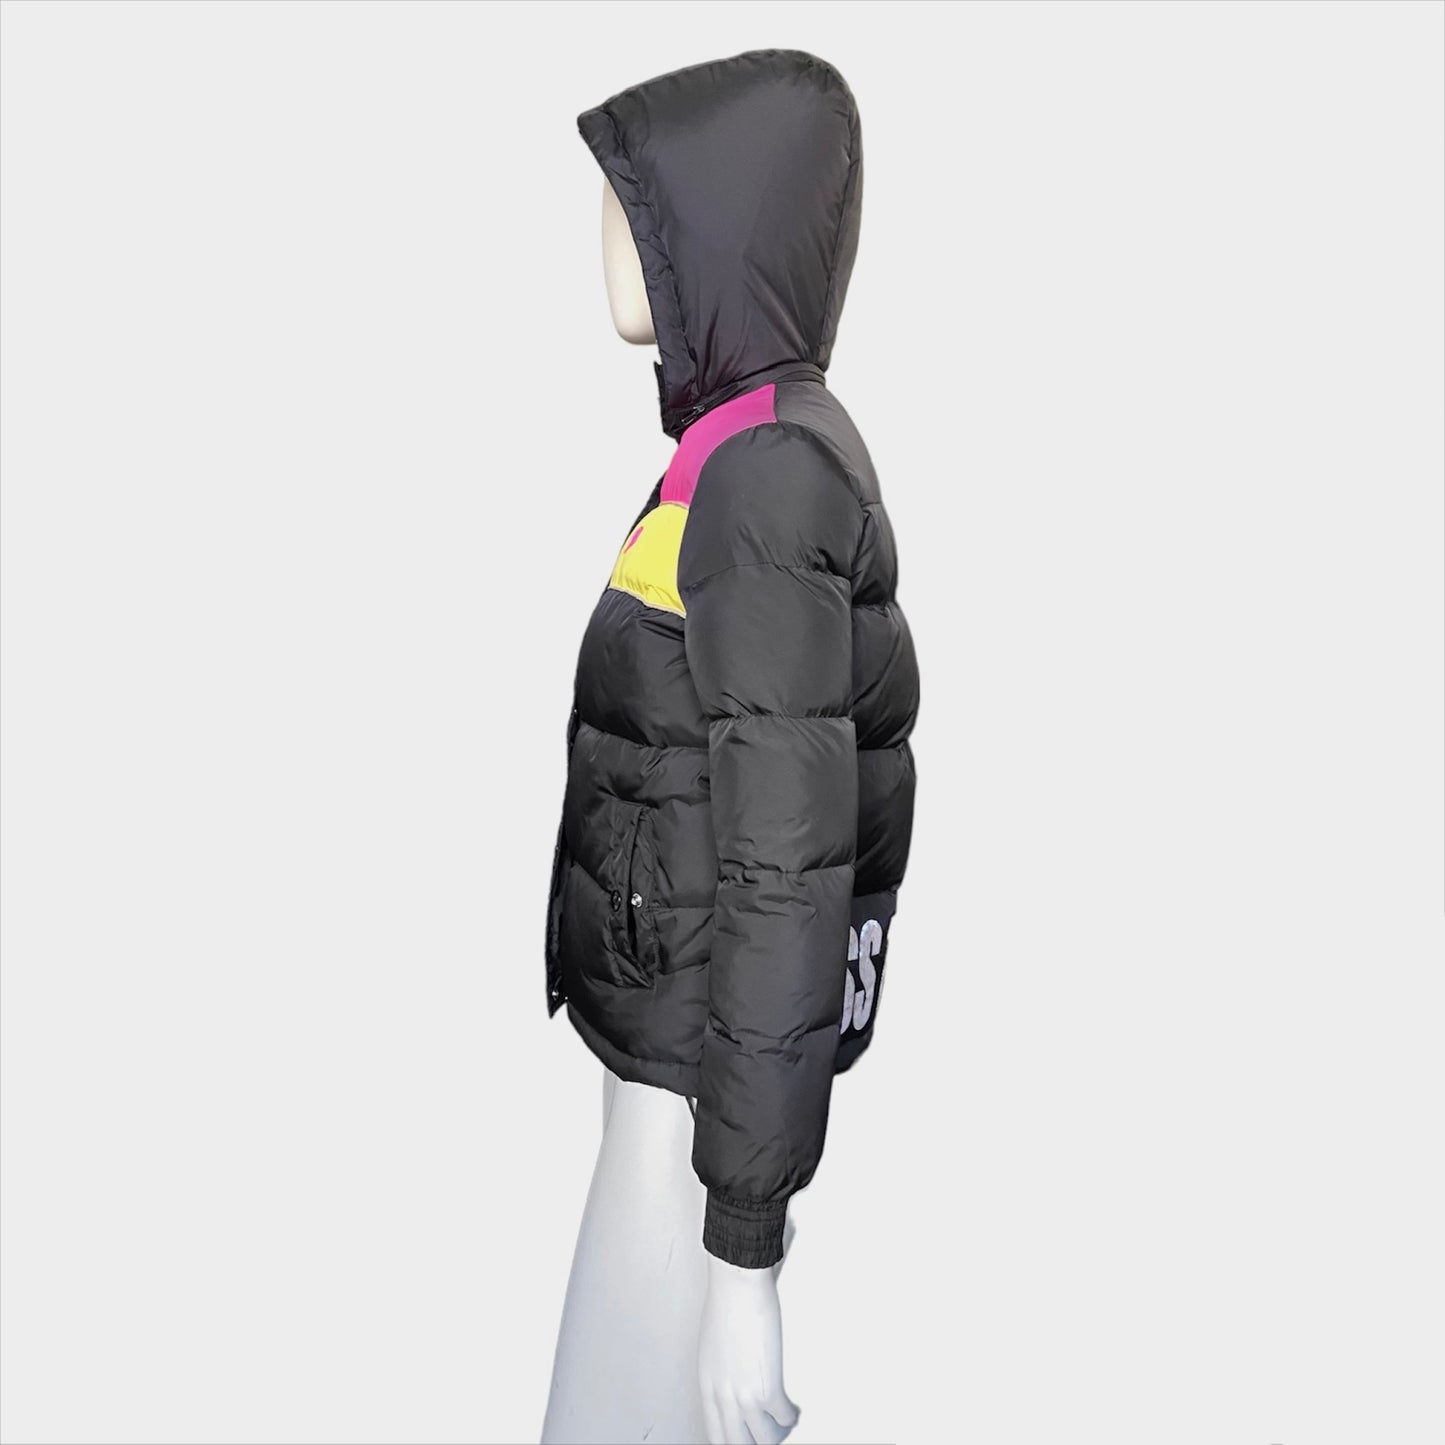 W&LT "KISS THE FUTURE" goose down puffer jacket with hood M